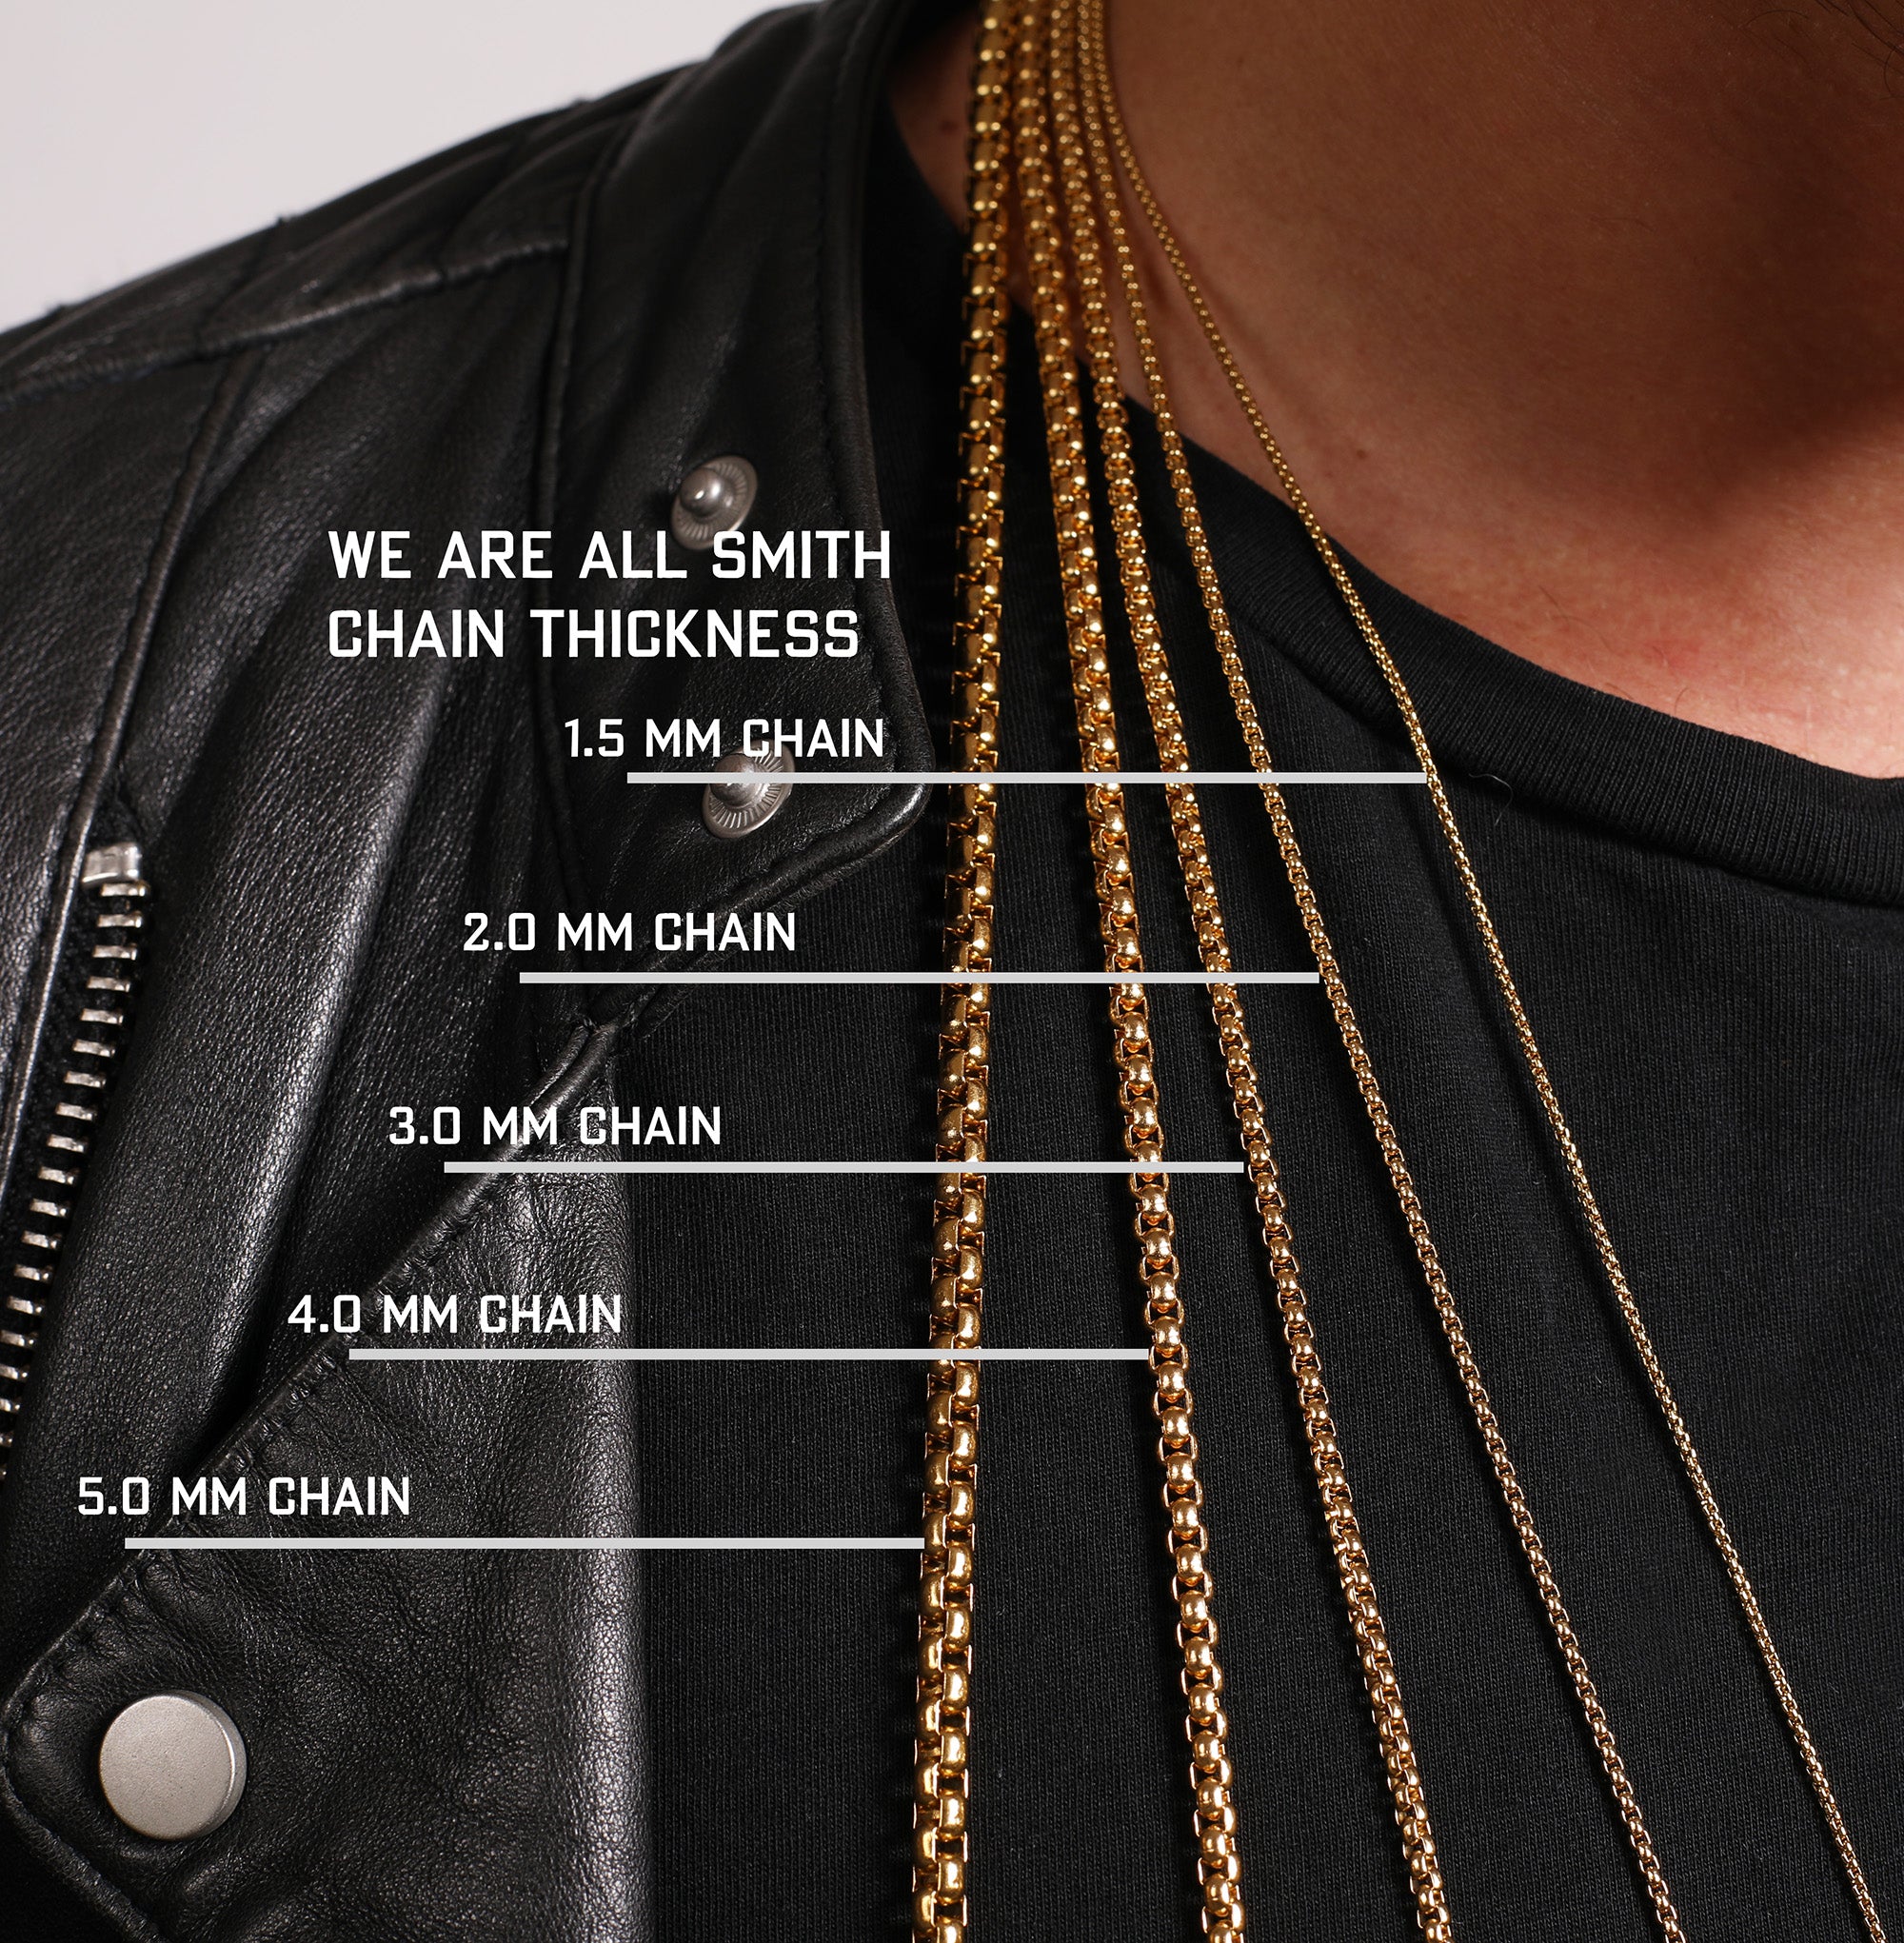 Necklace chain thickness chart